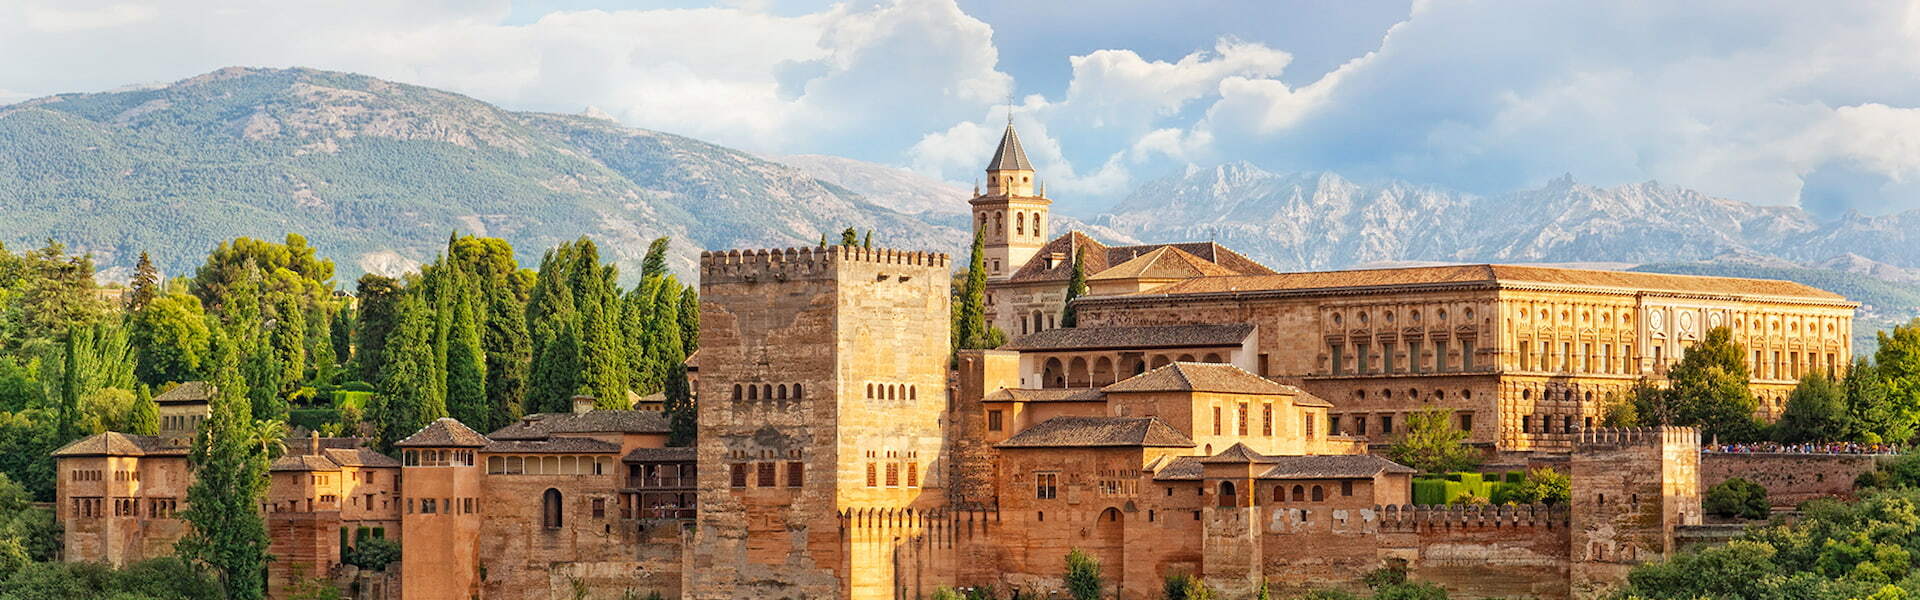 Alhambra palace in Spain, with green treea and mountains in the background